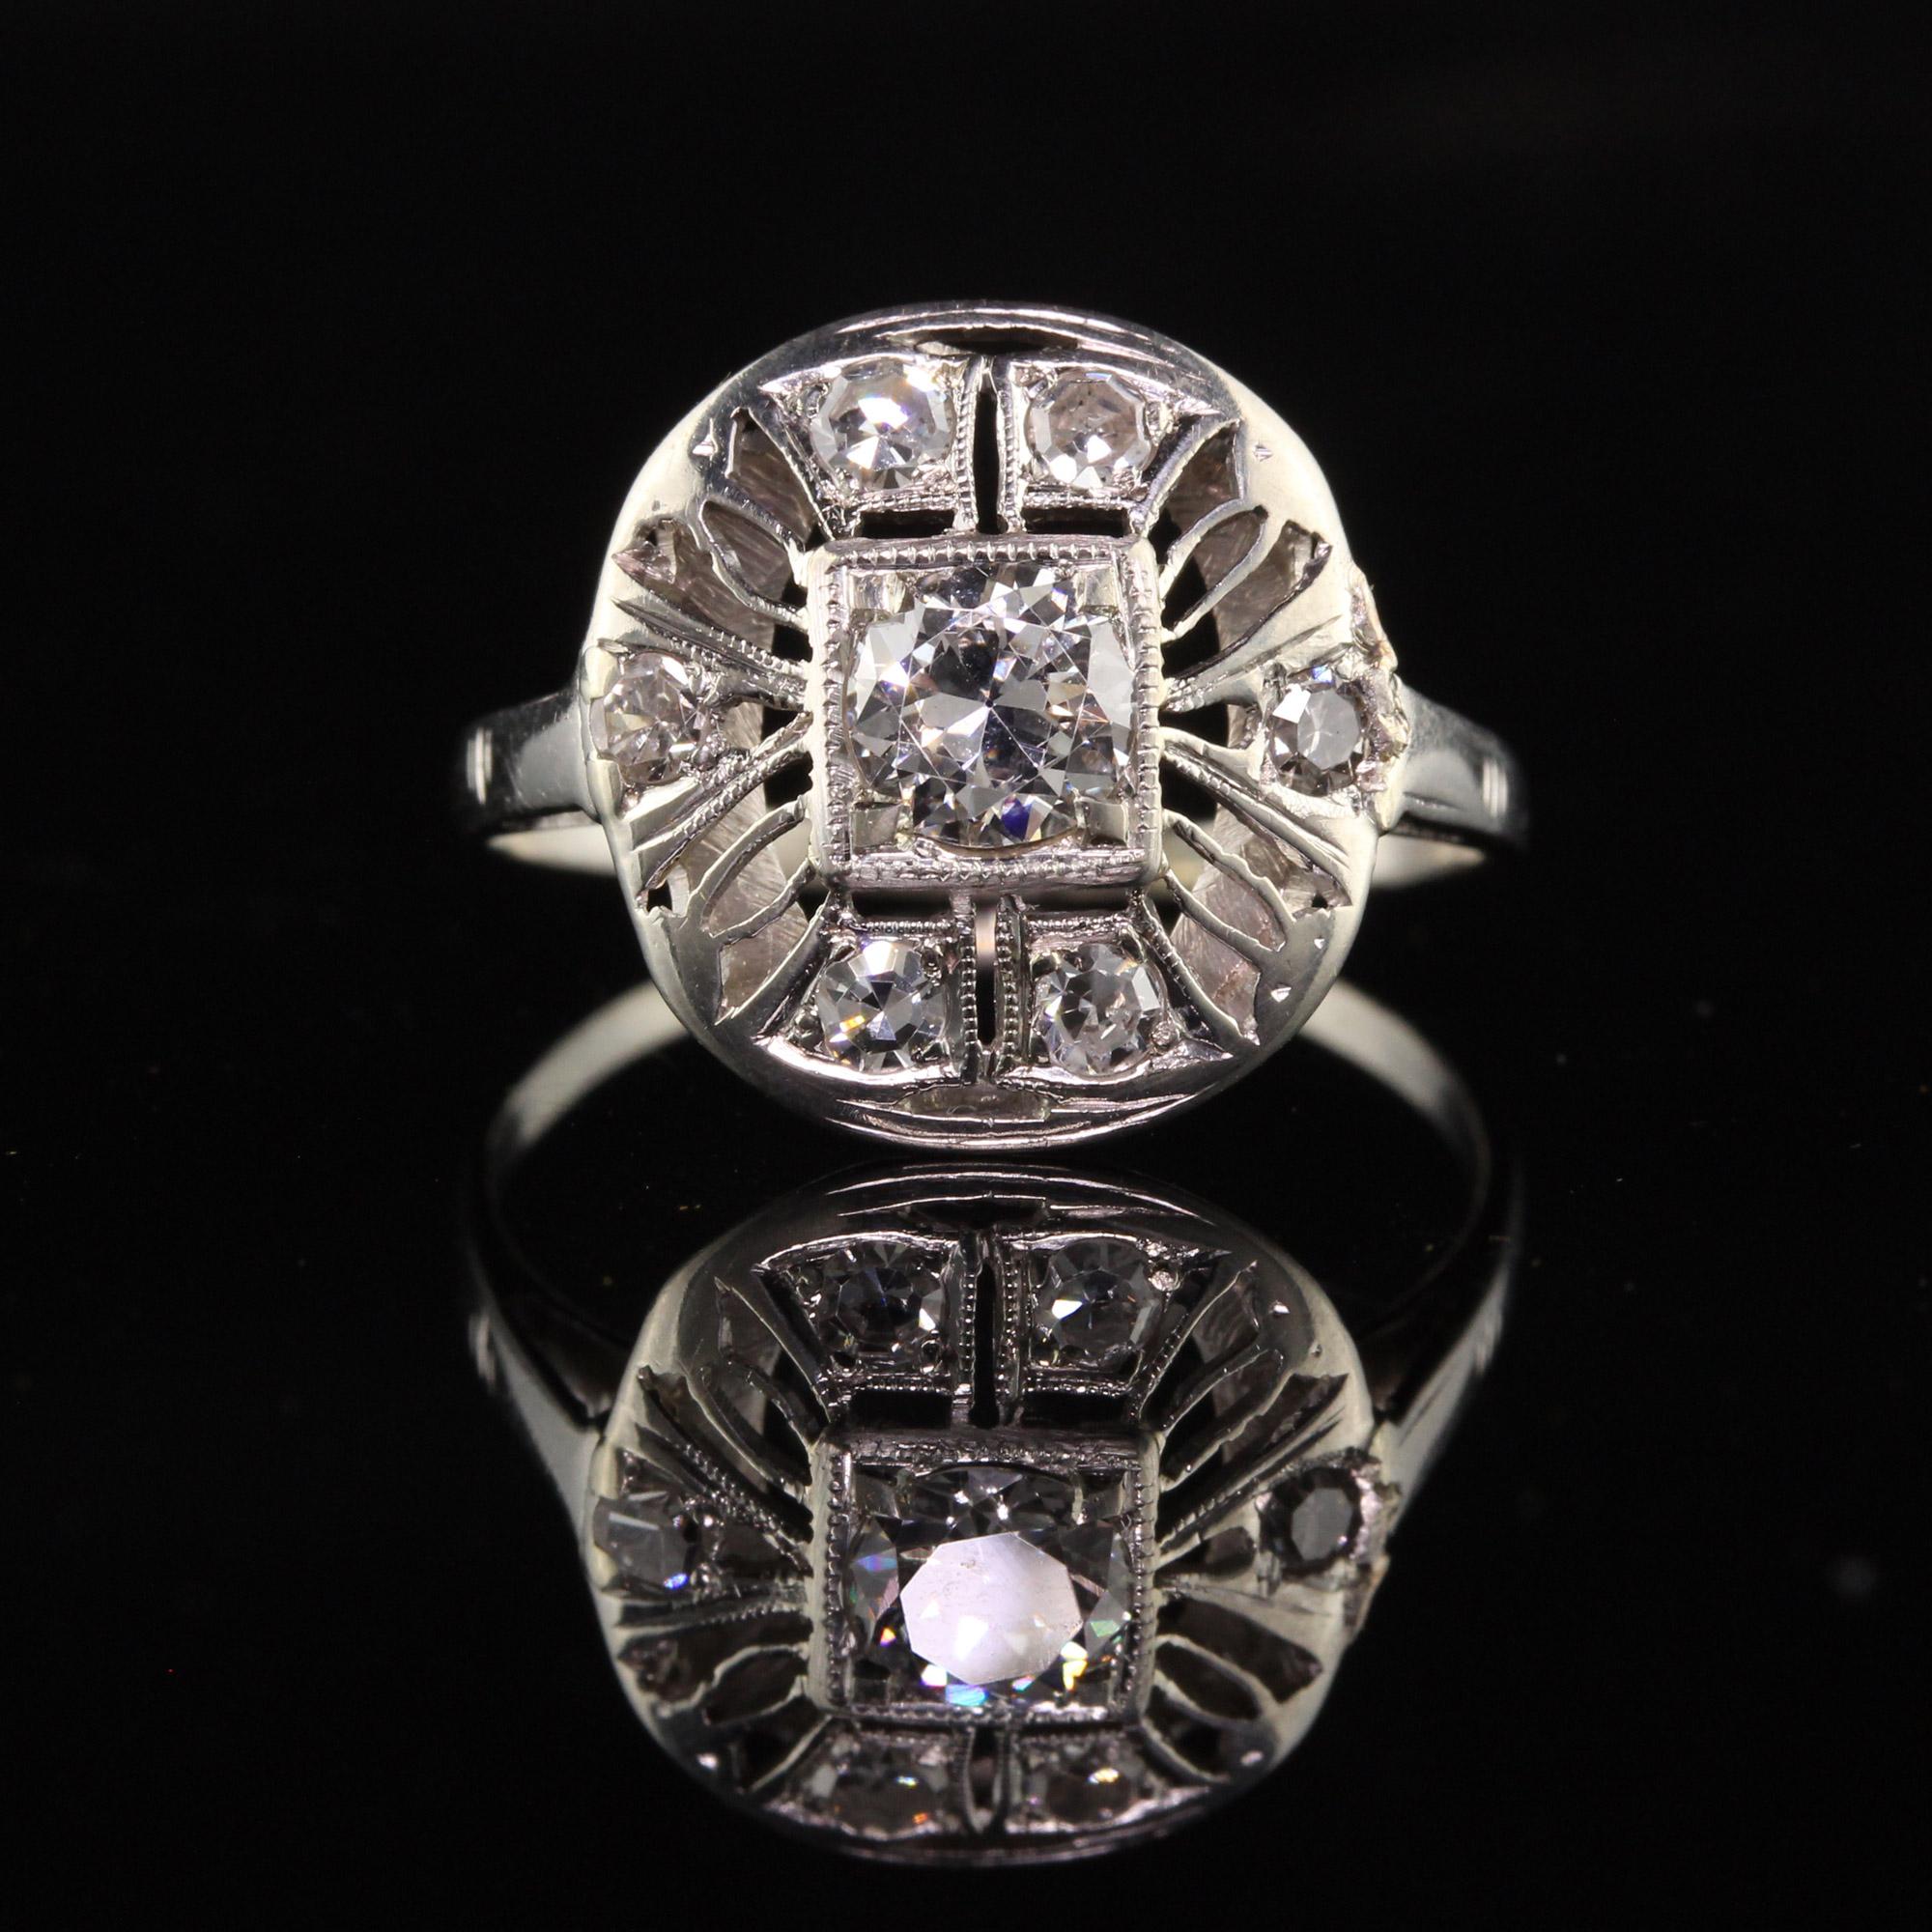 Antique Art Deco 14K White Gold Old European Cut Diamond Engagement Ring In Good Condition For Sale In Great Neck, NY